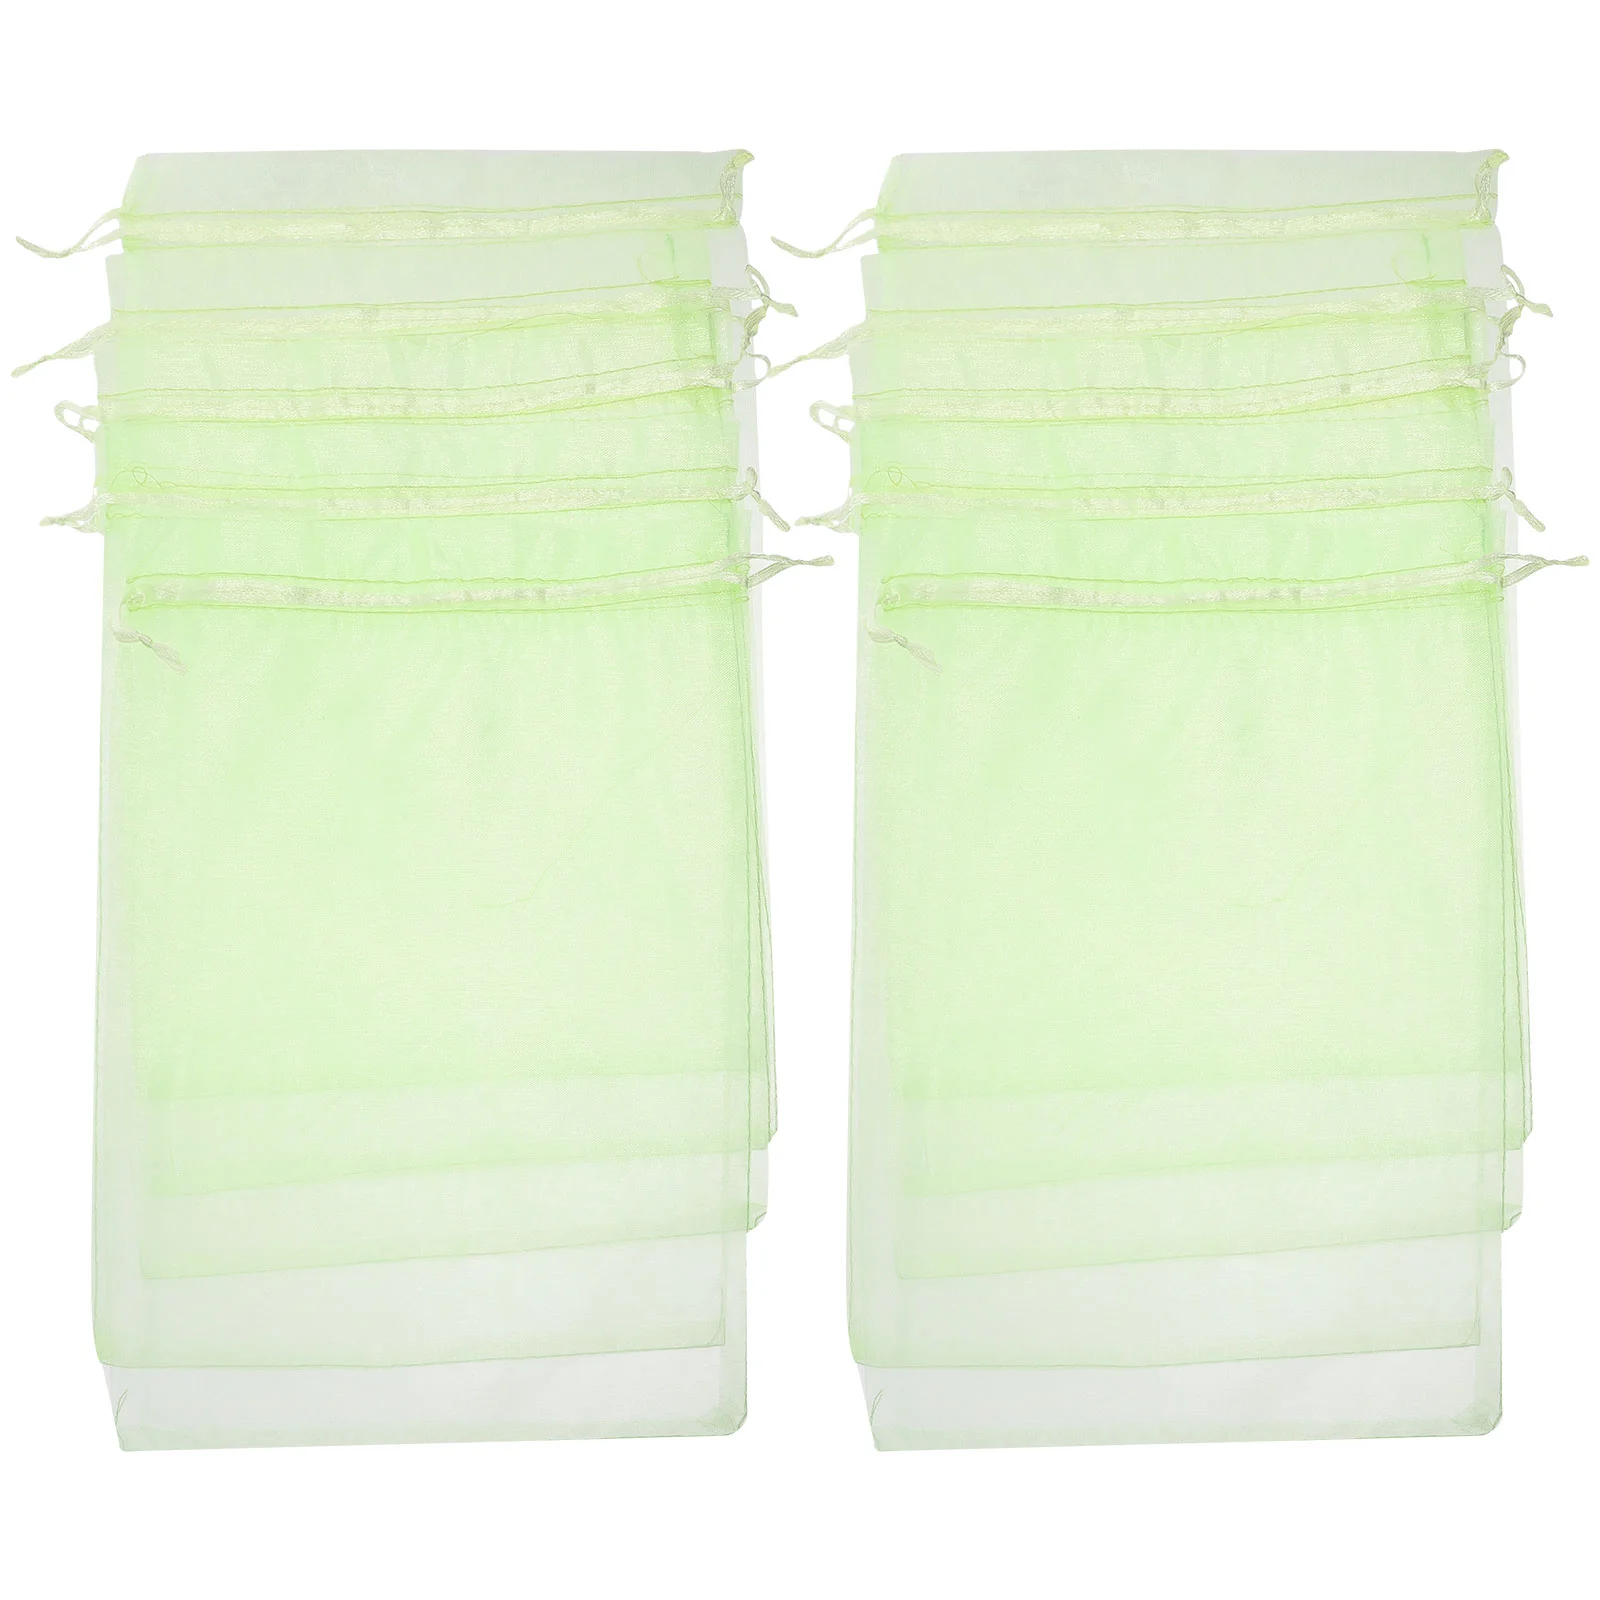 

50 Pcs Fruit Protection Bag Garden Mesh Barrier Bags Netting Cover Strawberry Growing Pouches